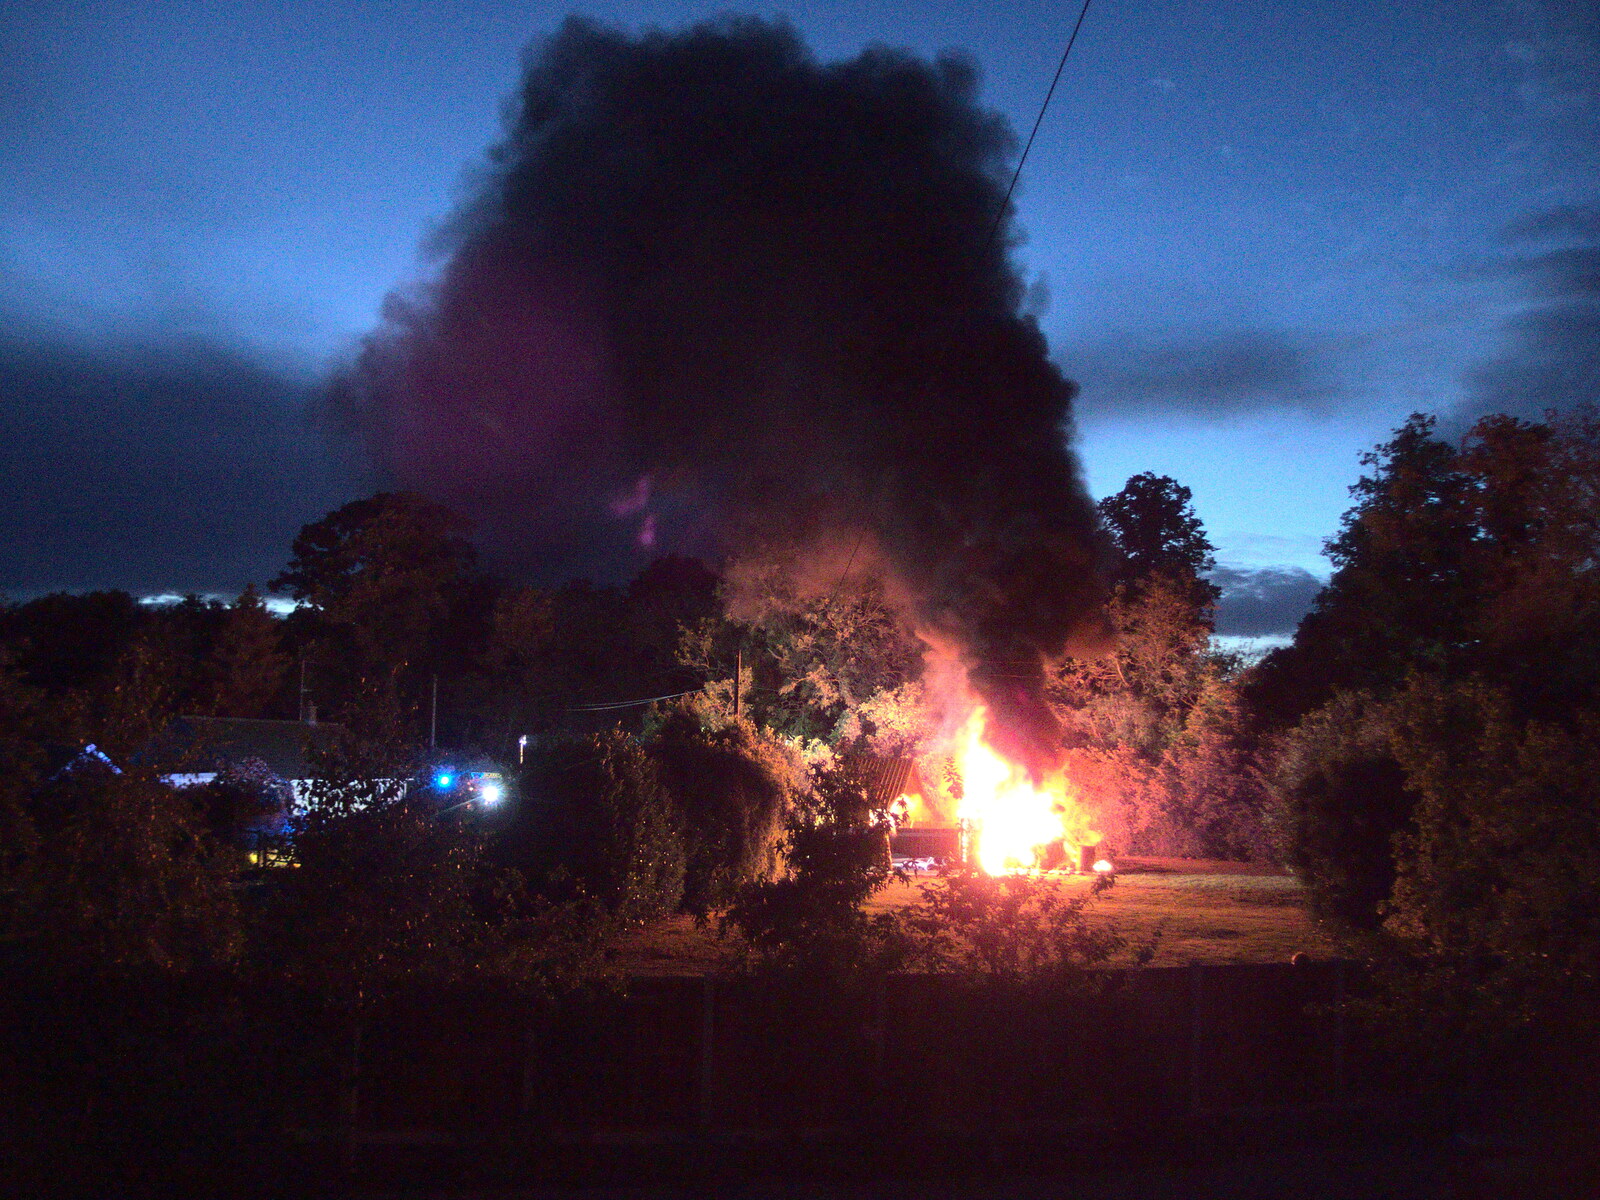 A wall of smoke drifts over the Oaksmere from A Fire, a Fête, and a Scout Camp, Hallowtree, Suffolk - 30th June 2022